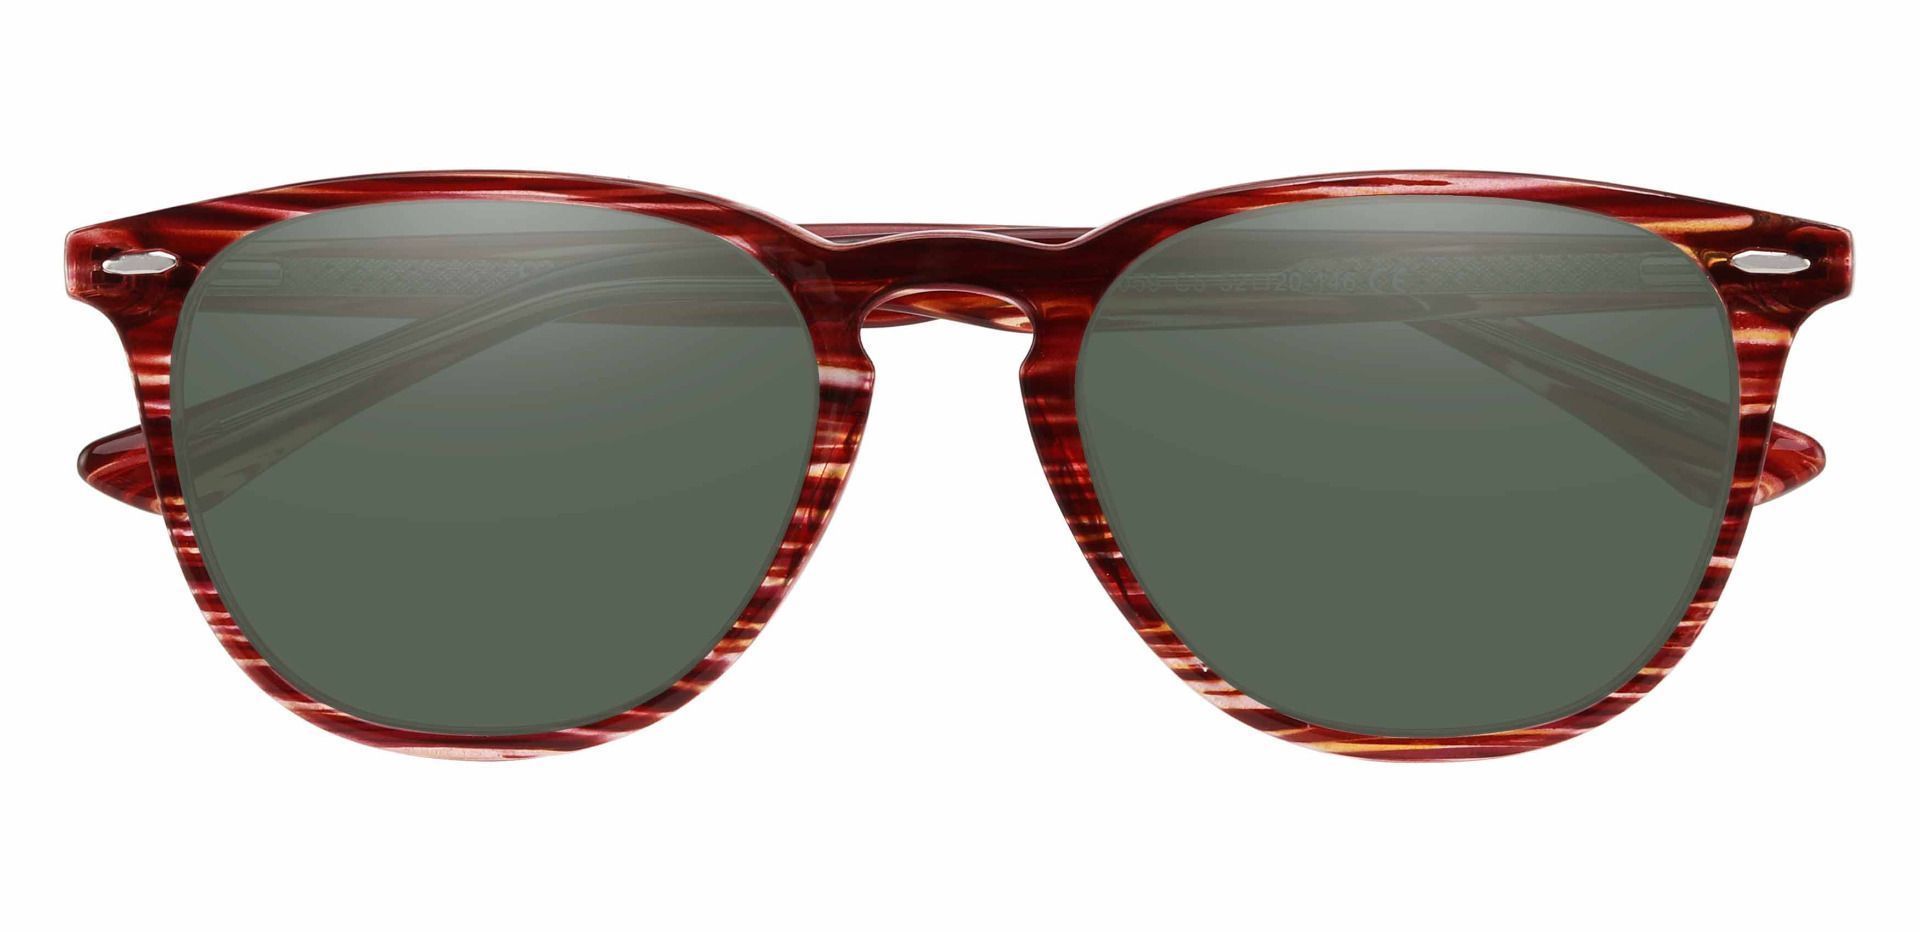 Sycamore Oval Lined Bifocal Sunglasses - Red Frame With Green Lenses